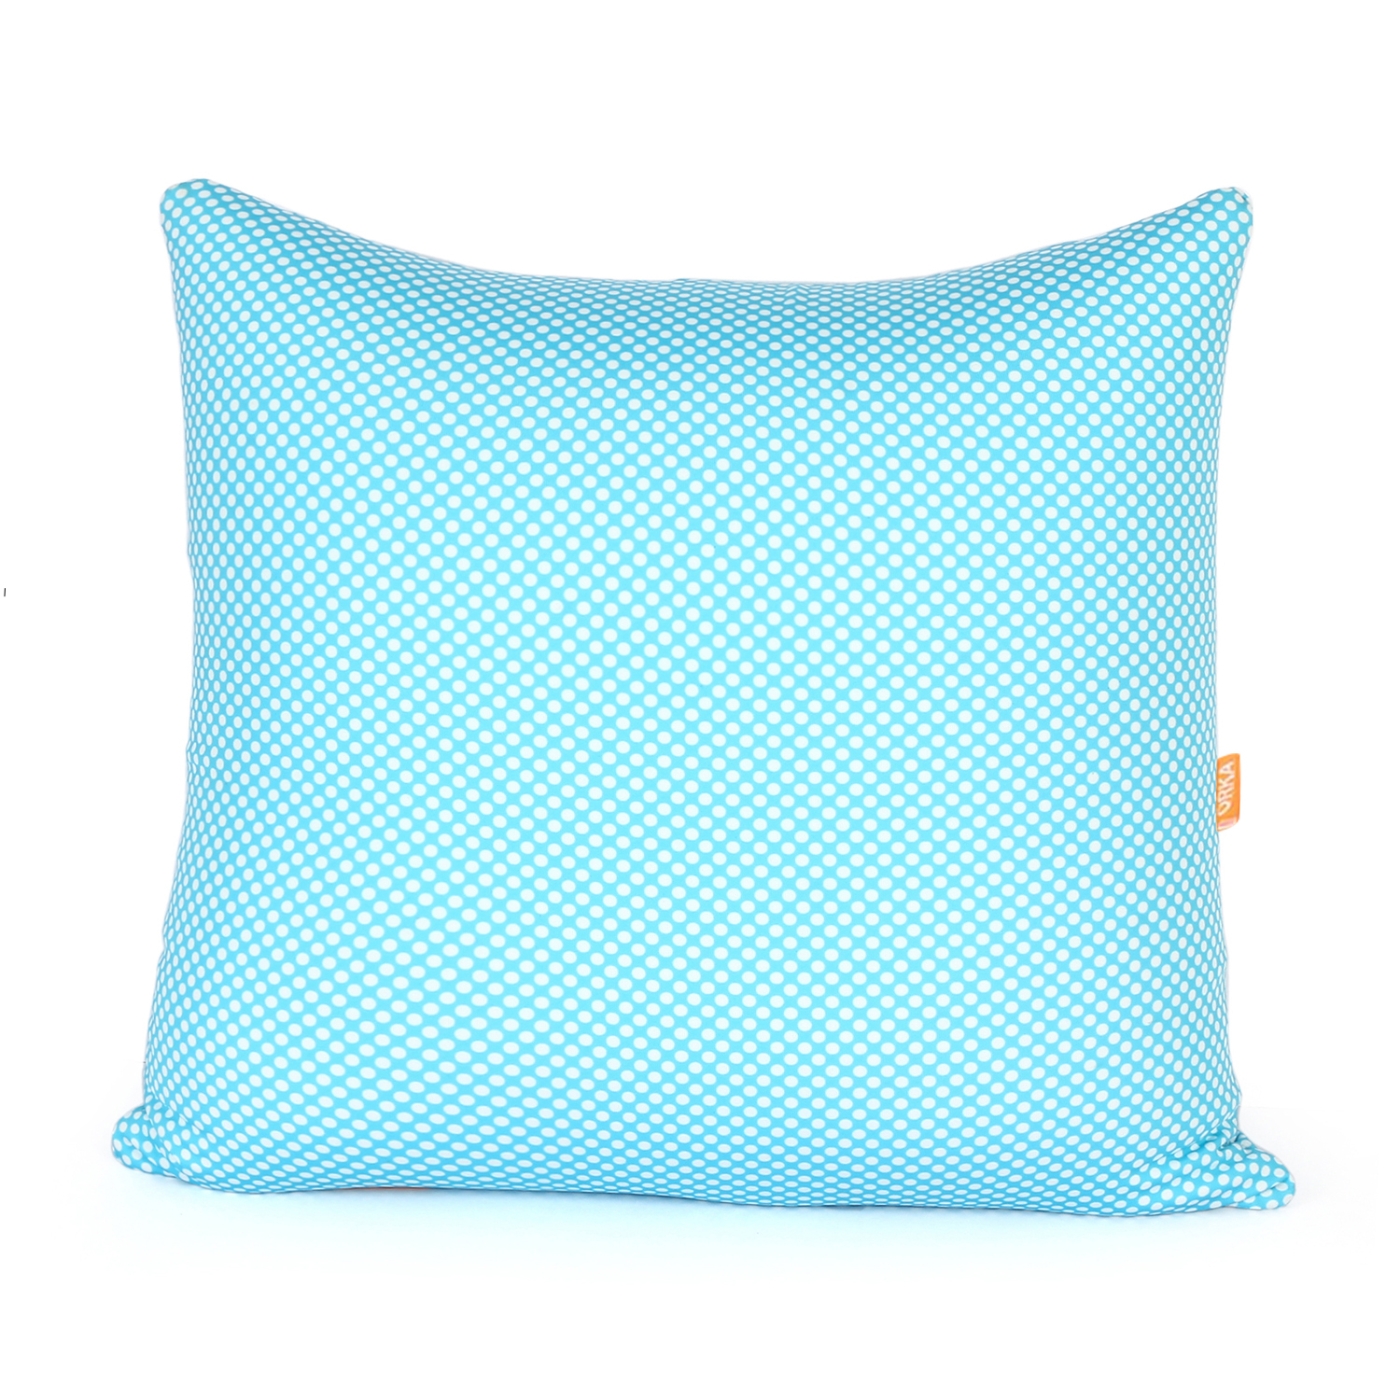 ORKA Digital Printed Spandex Filled With Microbeads Square Cushion 14 X 14 Inch - Teal, White  